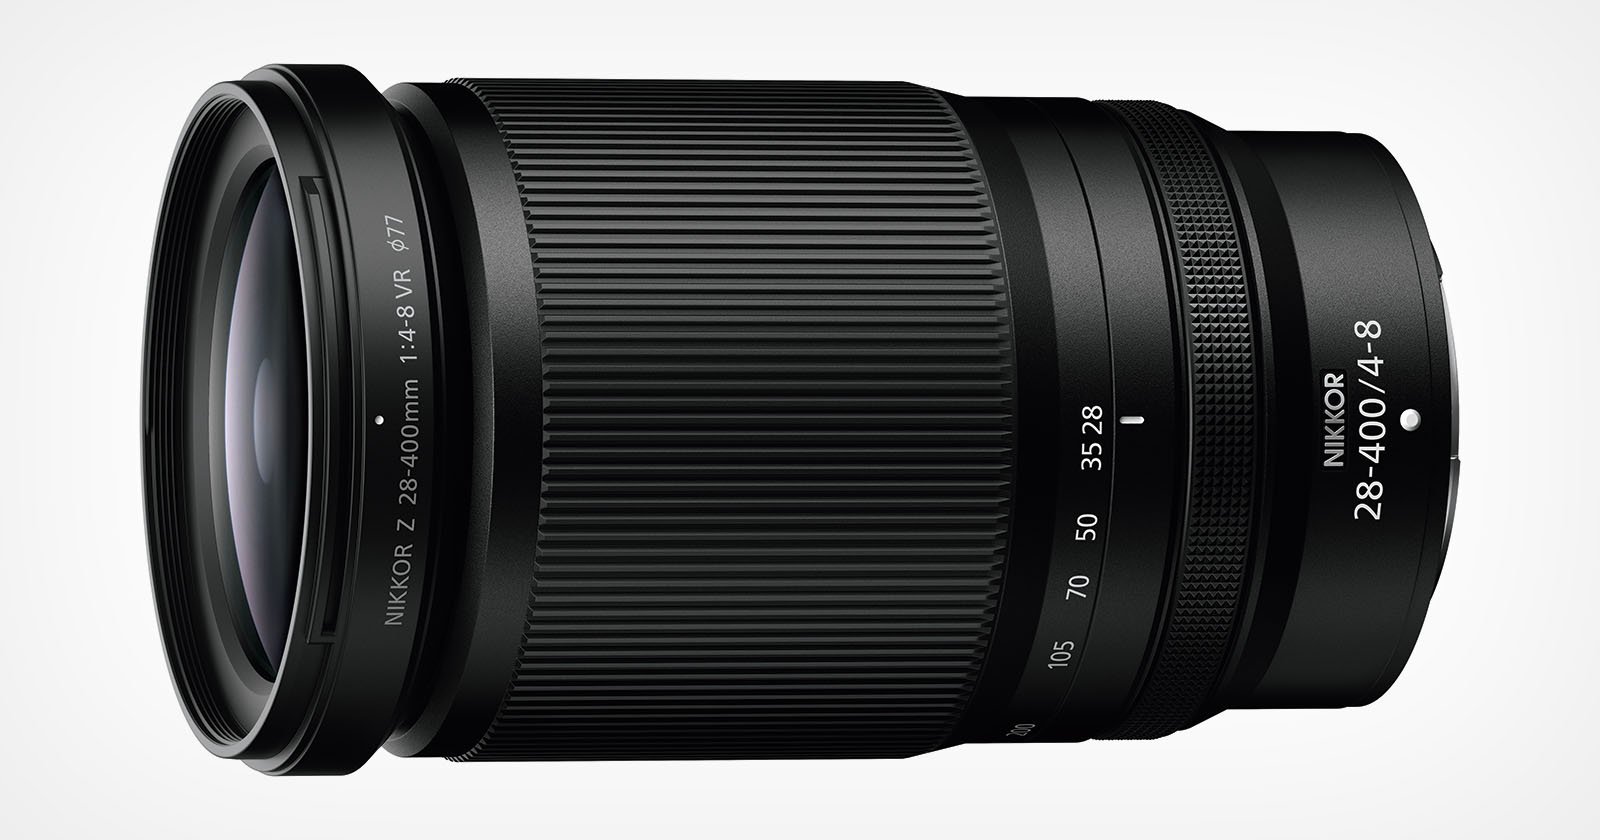 Nikons New Z 28-400mm f/4-8 VR Aims To Be the Ultimate Travel Lens